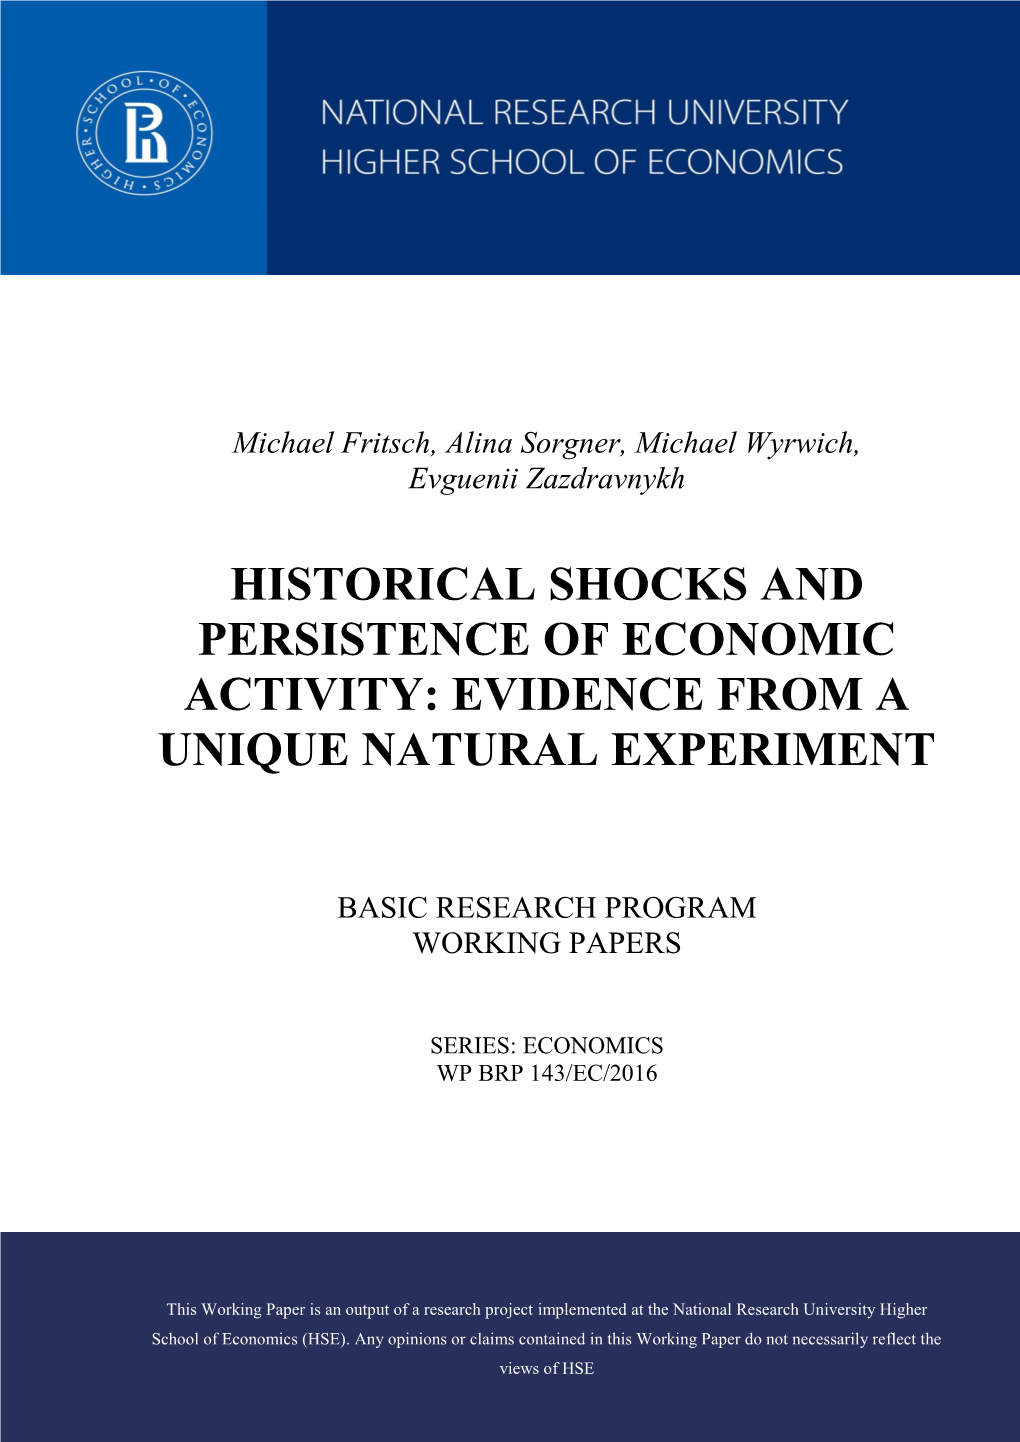 Historical Shocks and Persistence of Economic Activity: Evidence from a Unique Natural Experiment